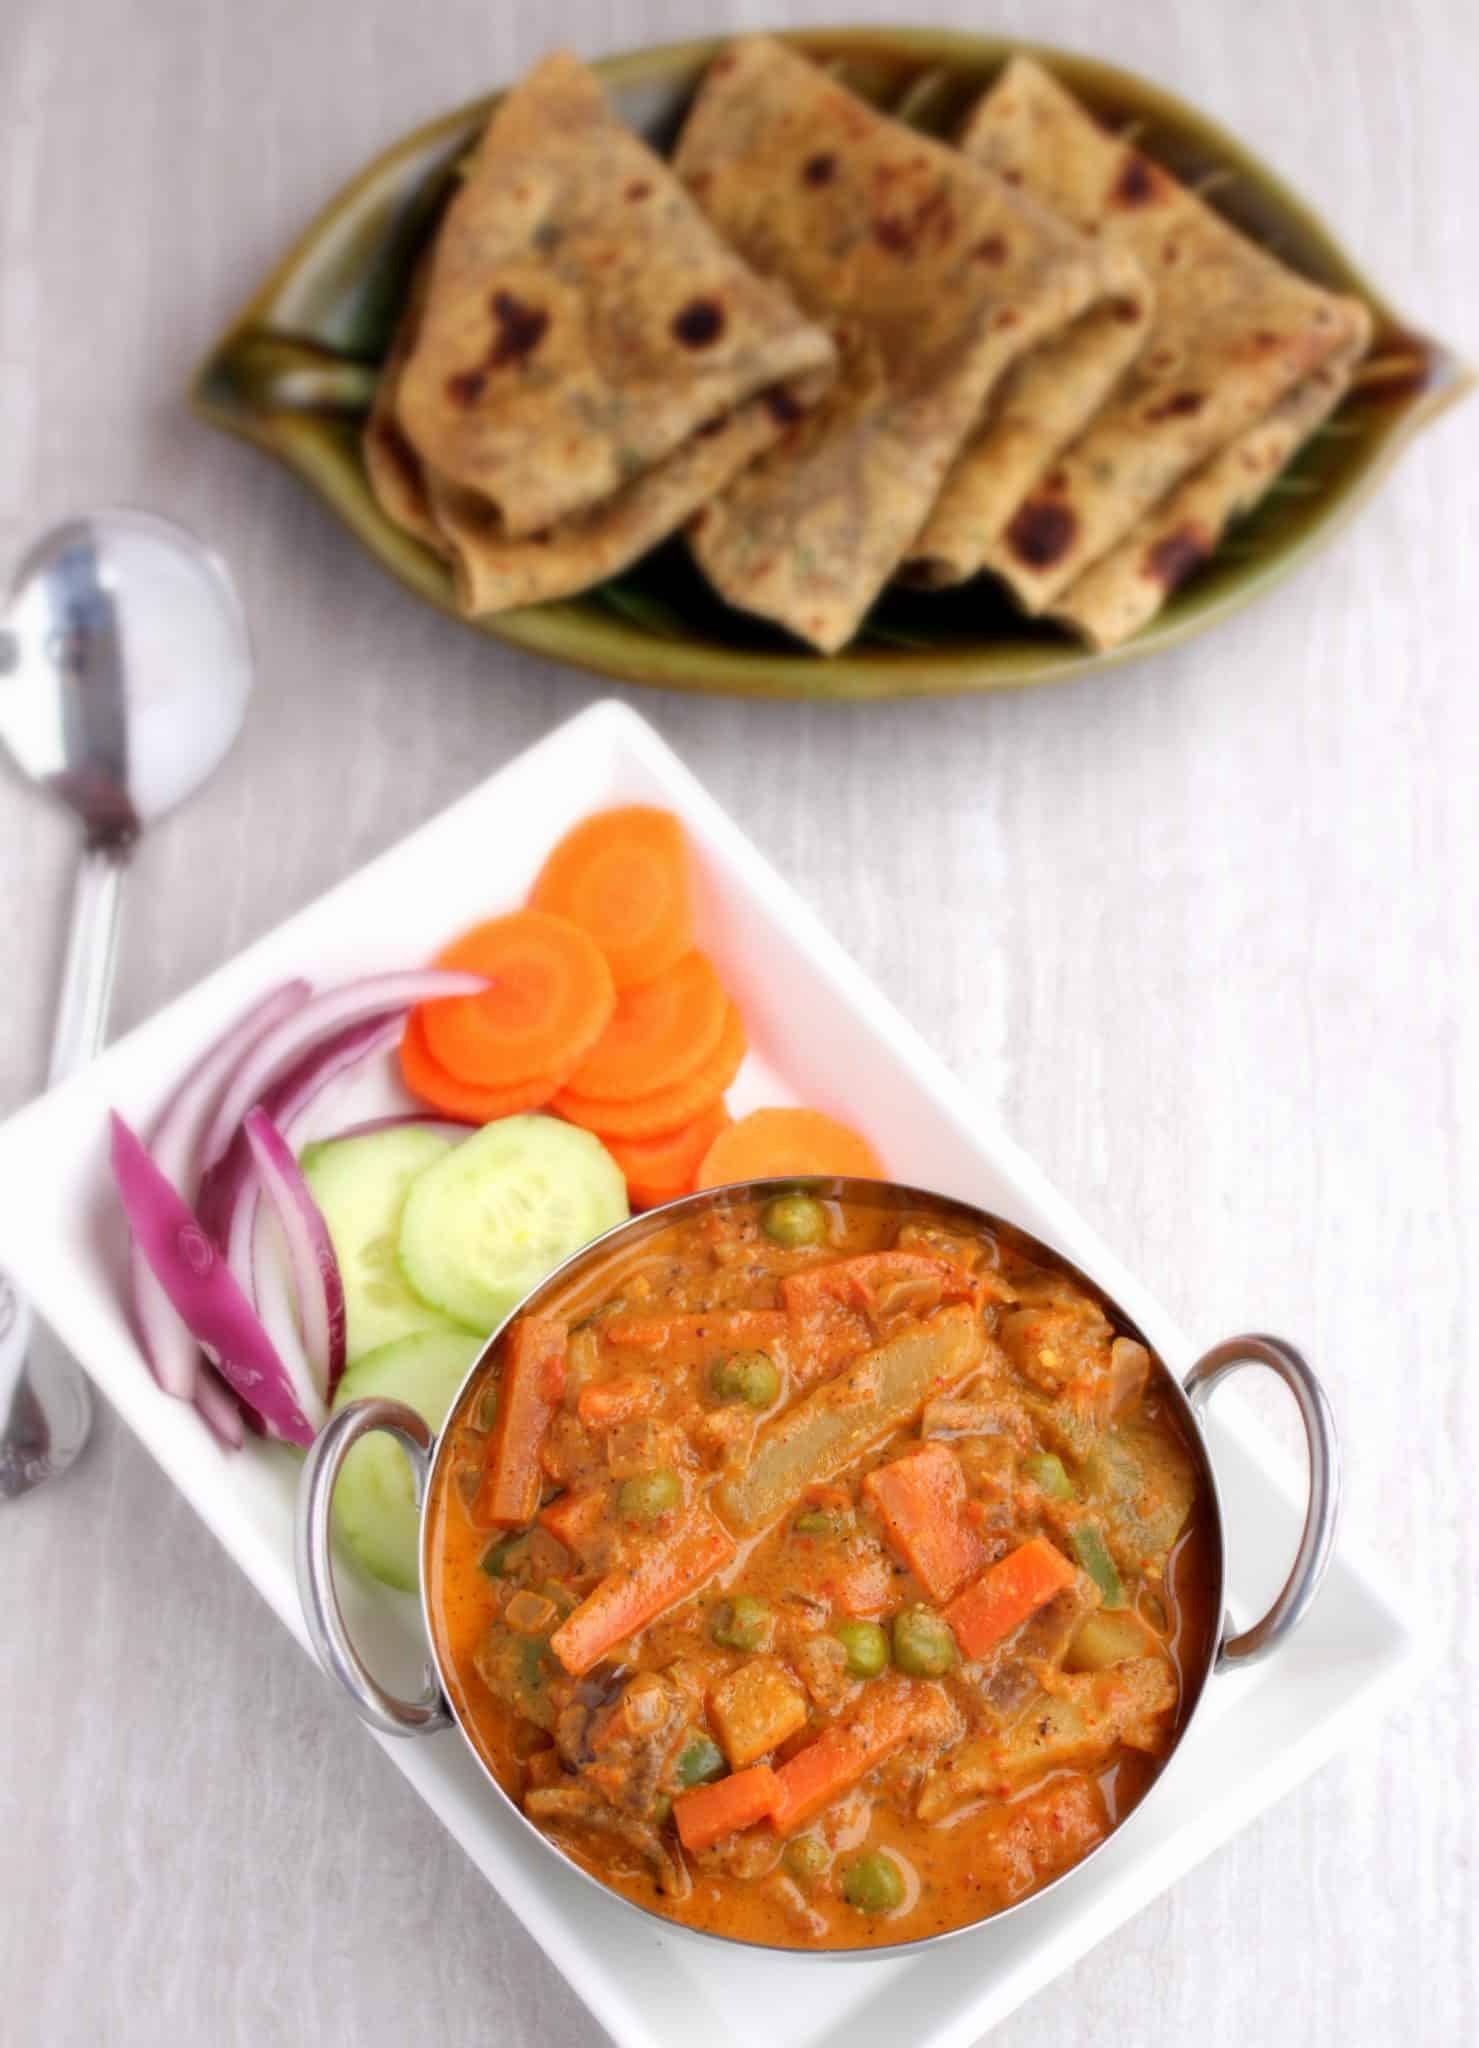 Kadai Vegetable Gravy - Final product with raw onions, cucumbers, carrots and roti